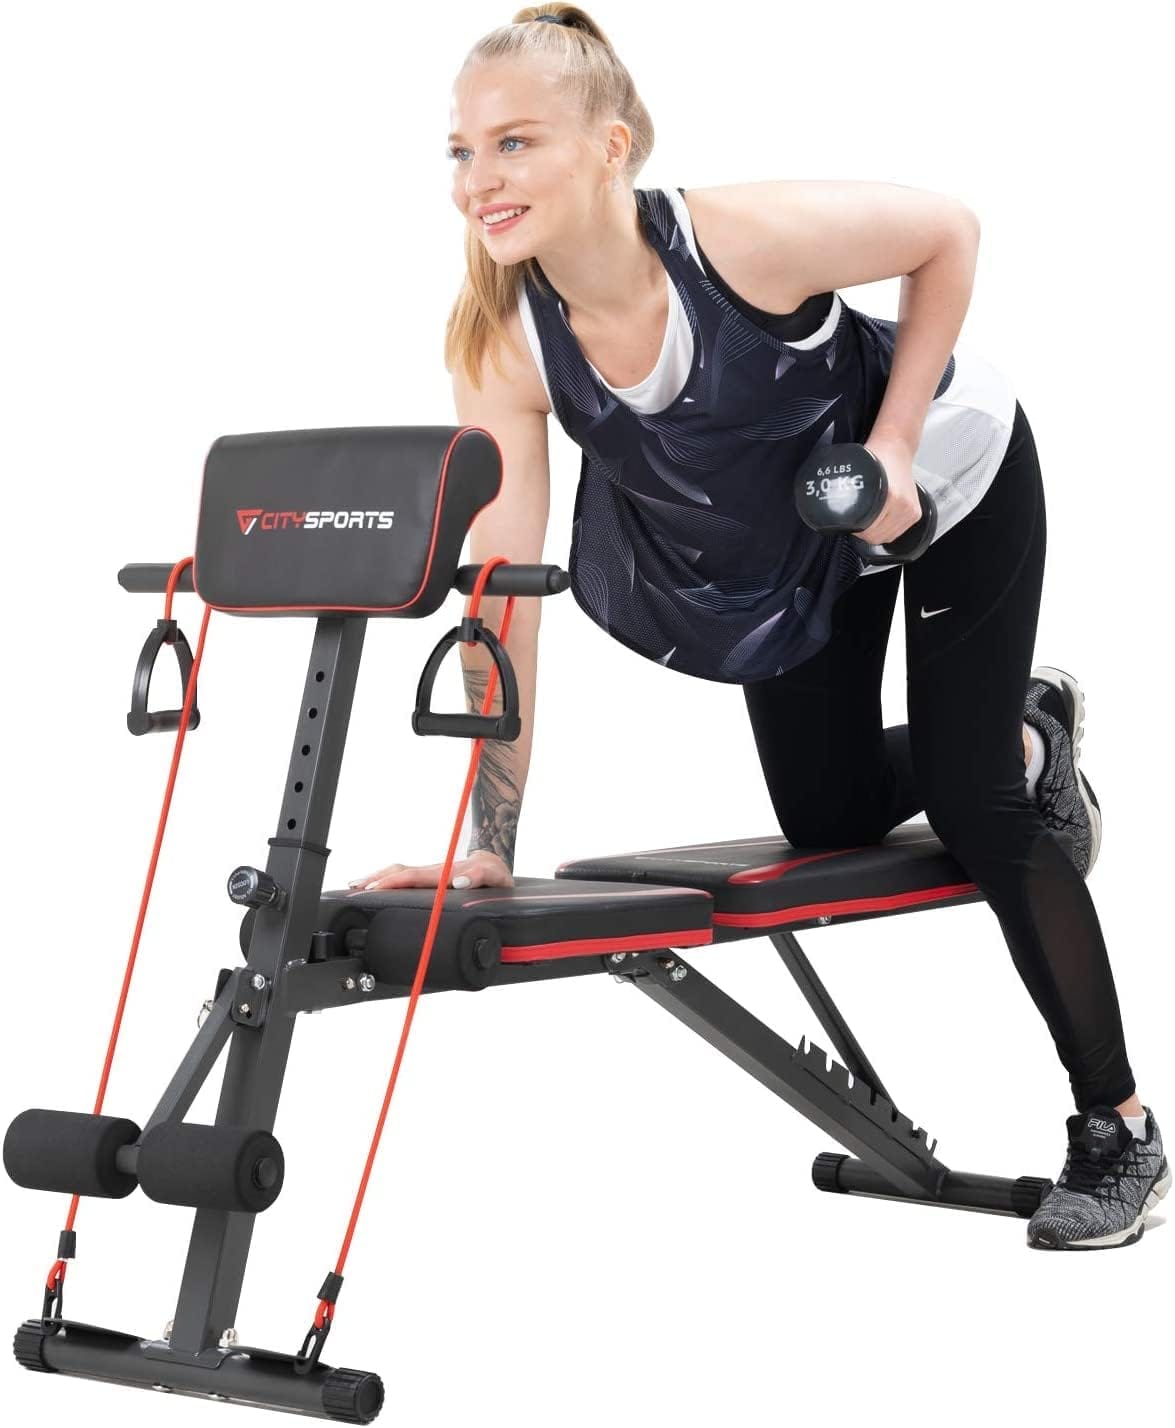 CITYSPORTS Adjustable Bench Review: Elevate Home Workouts